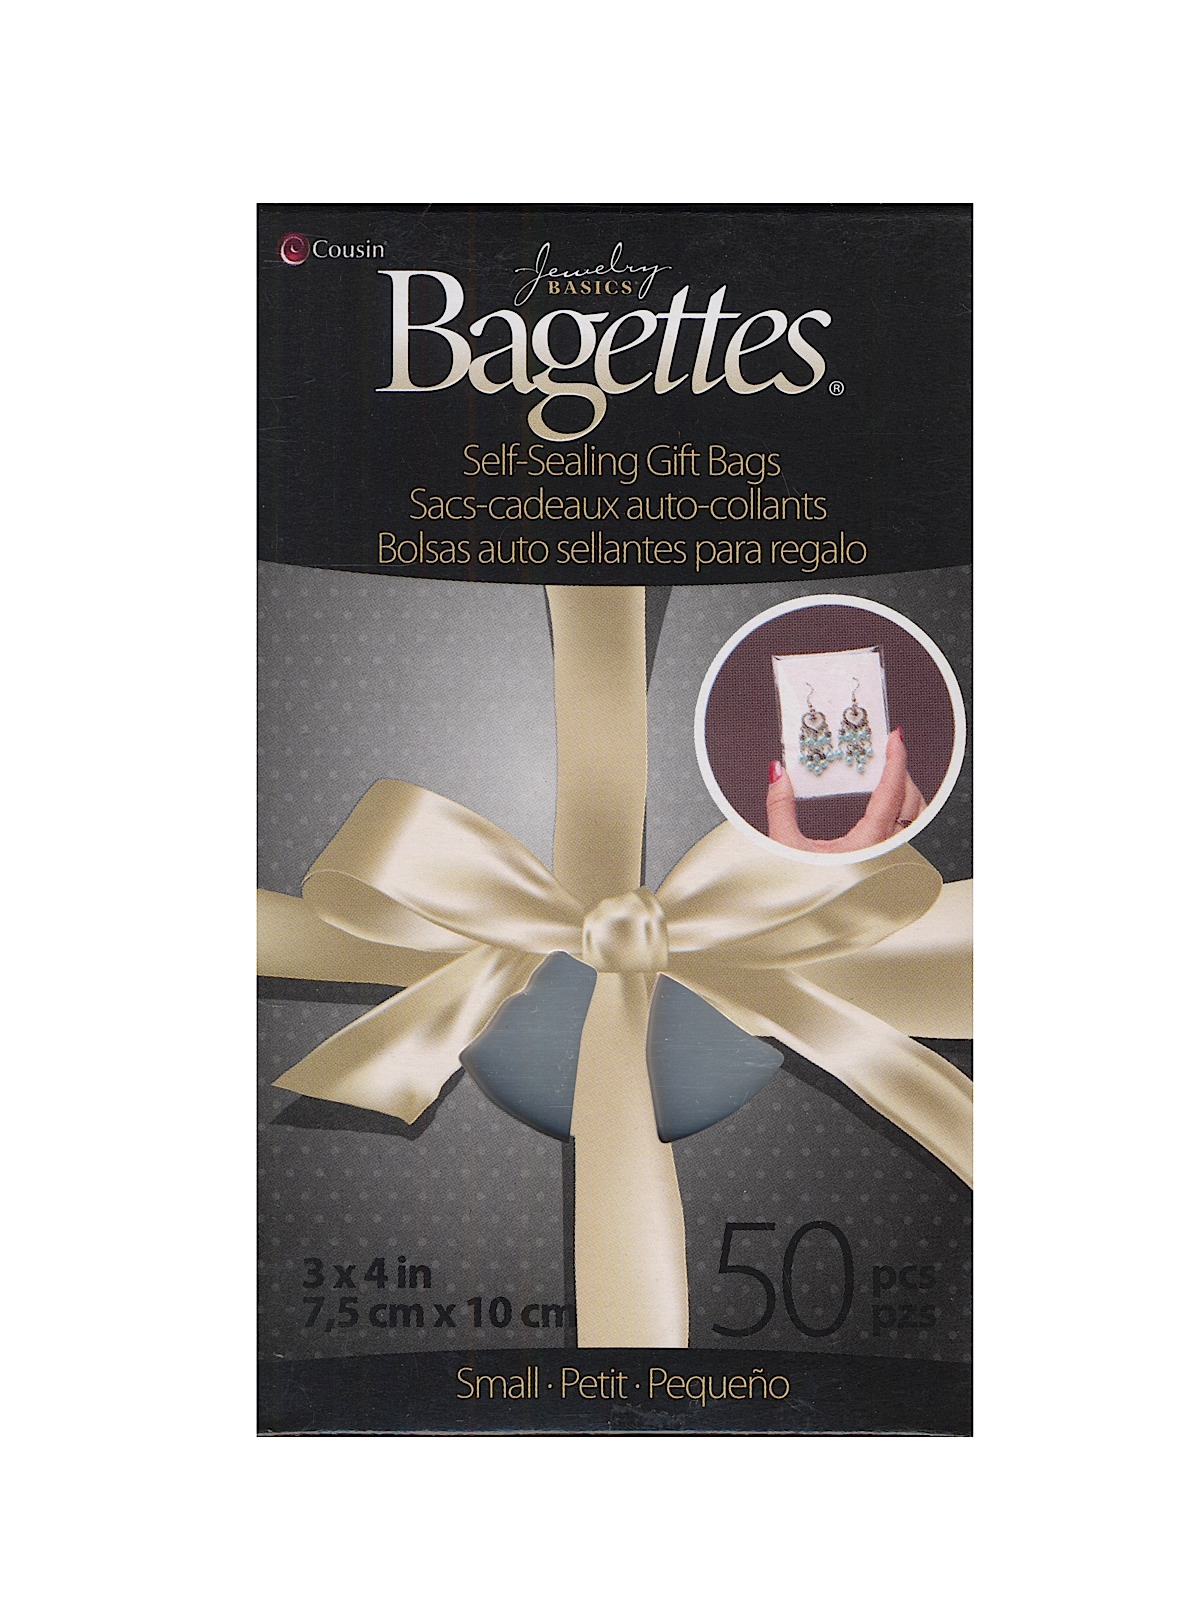 Bagettes Gift Bags 3 In. X 4 In. Box Of 50